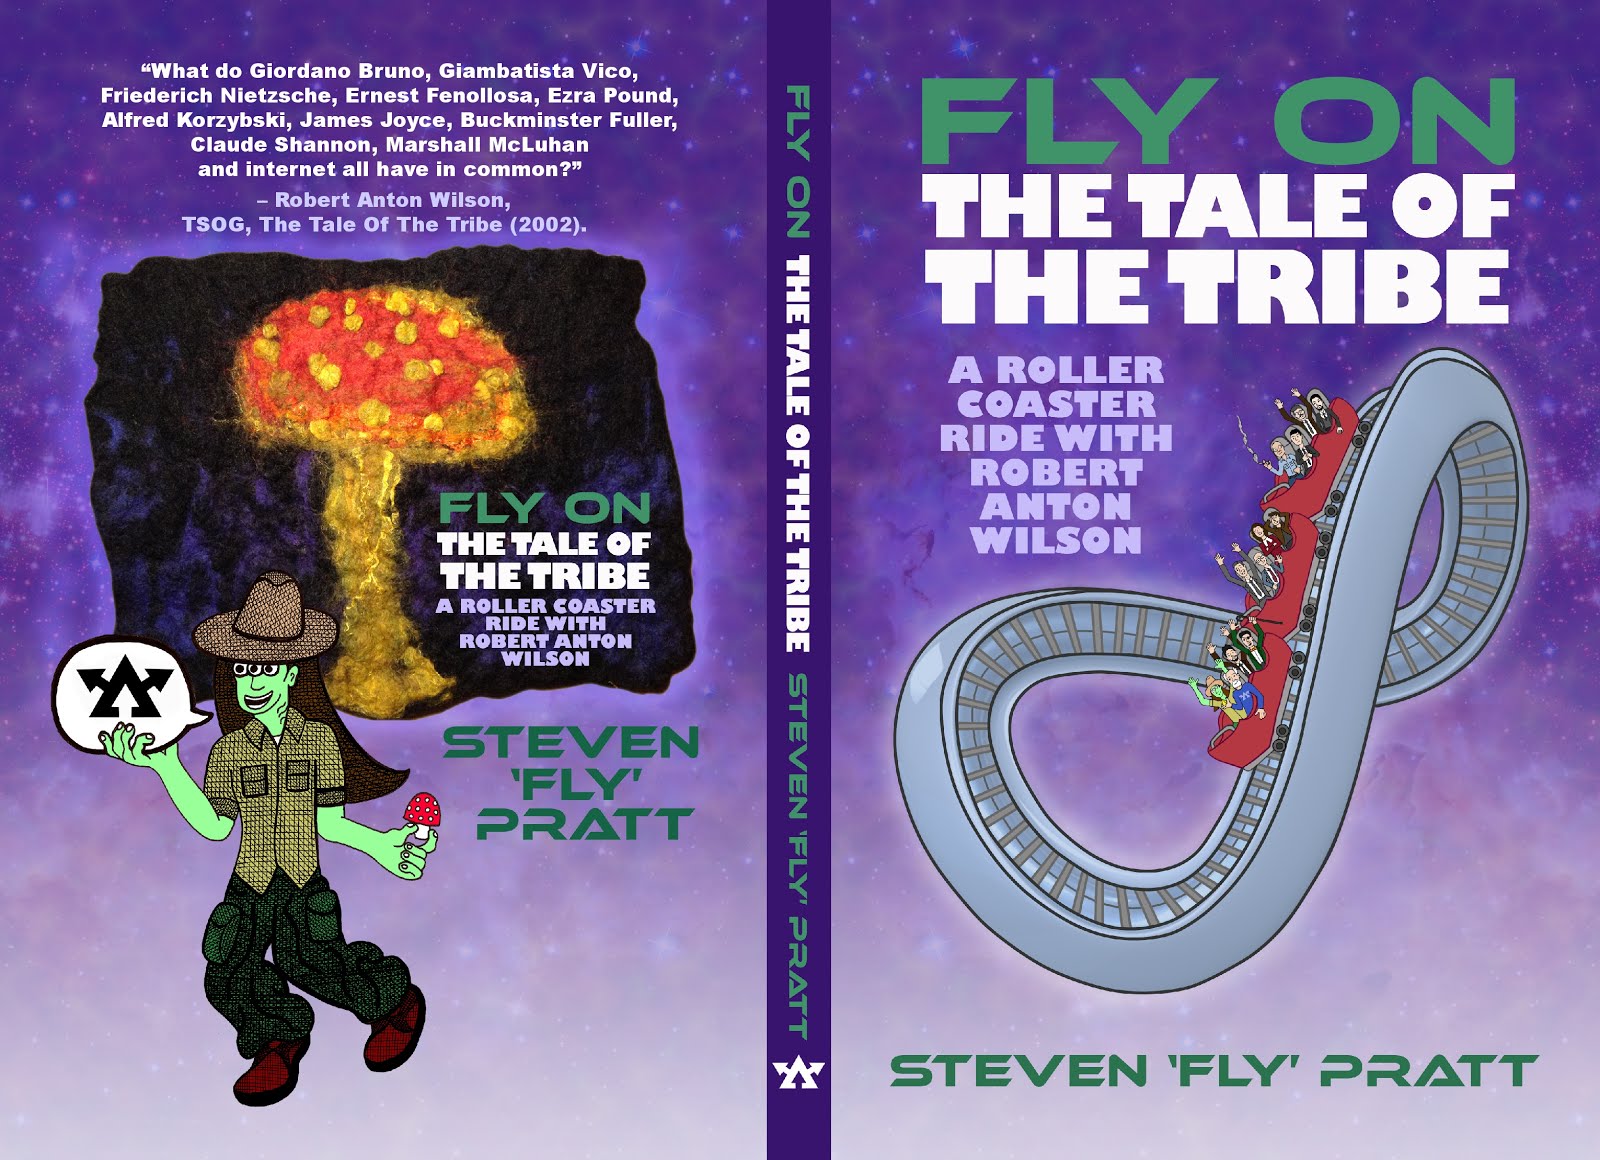 Fly On The Tale Of The Tribe